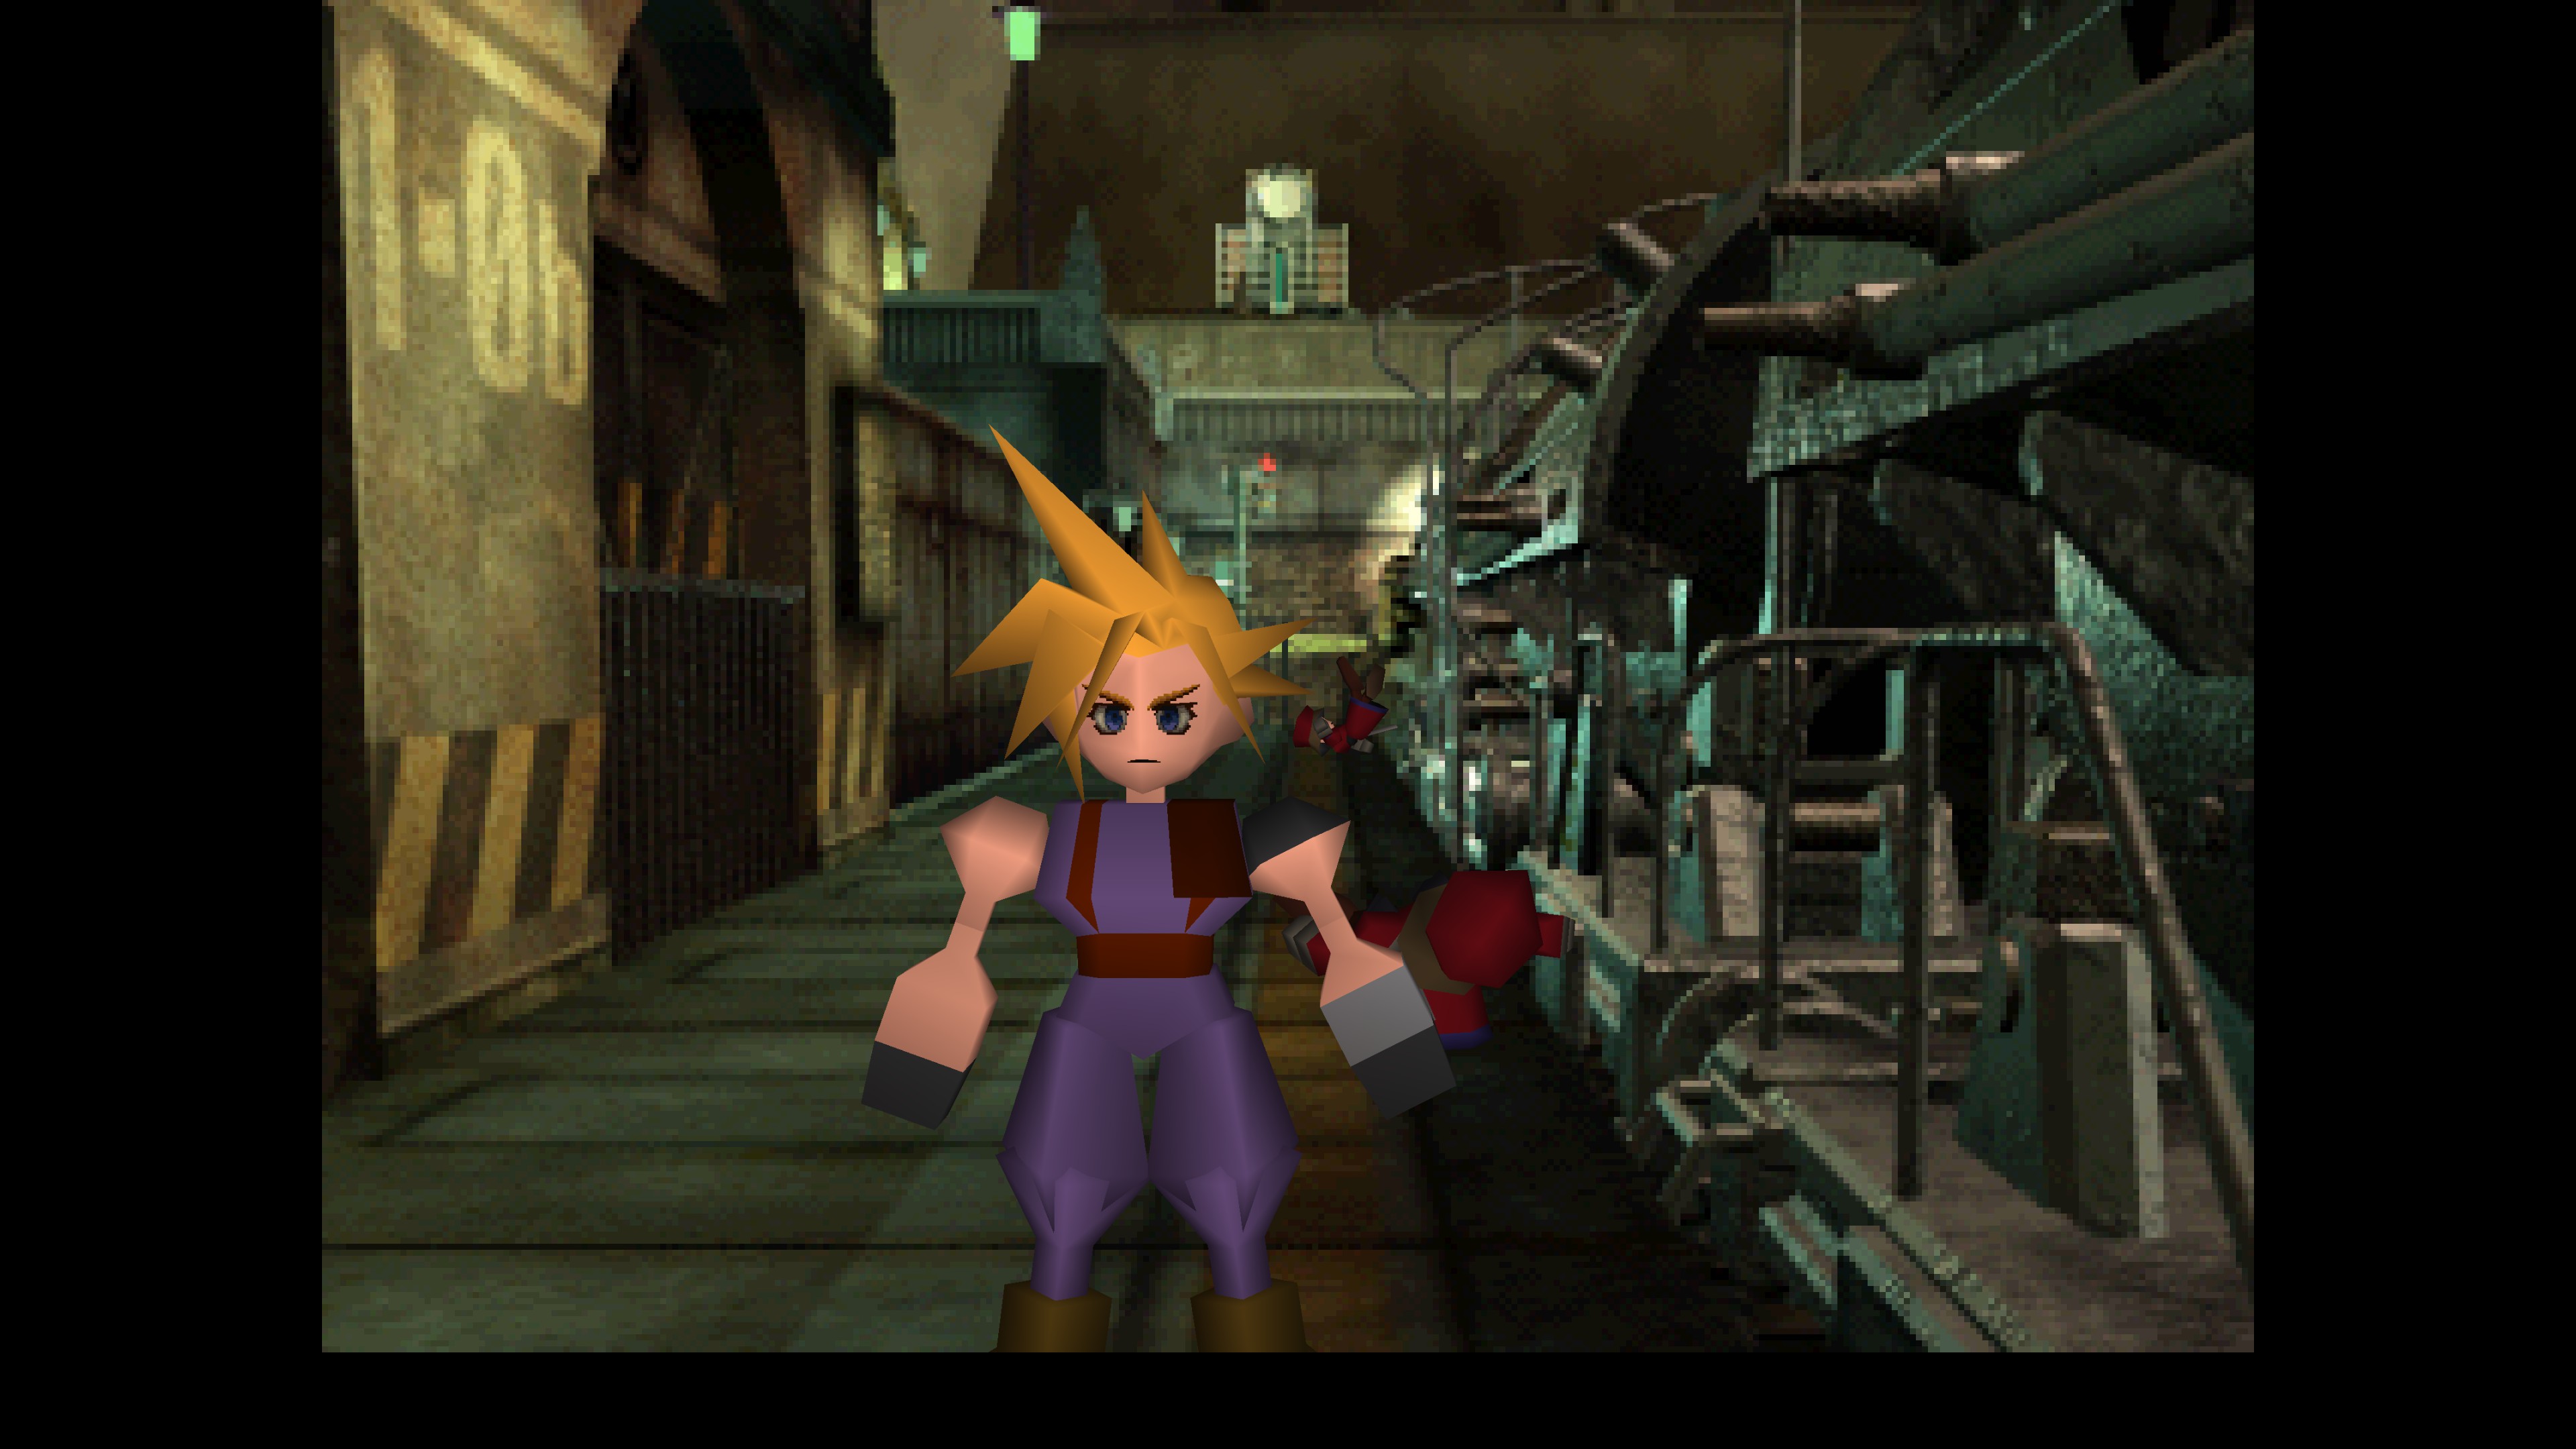 download final fantasy 7 for pc free full game